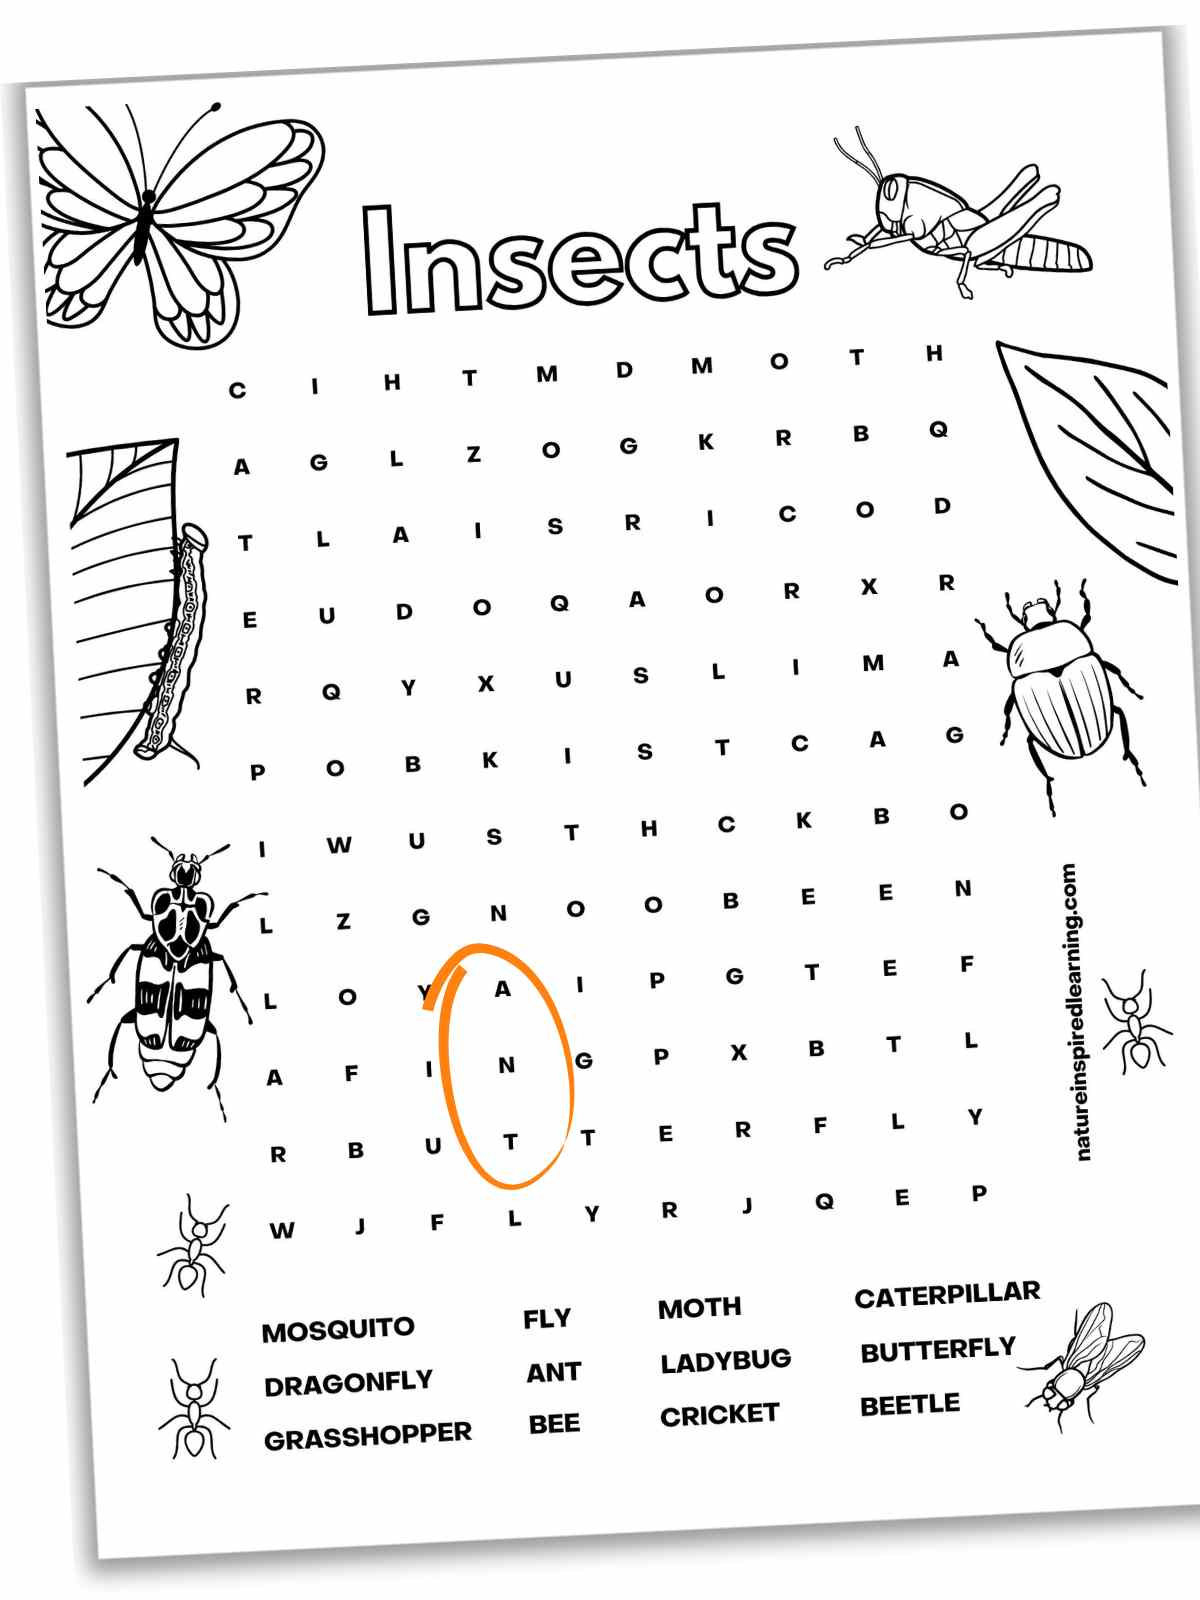 Black and white word search with an insect theme. Different images of bugs and insects around the border with ant circled in orange on the puzzle.